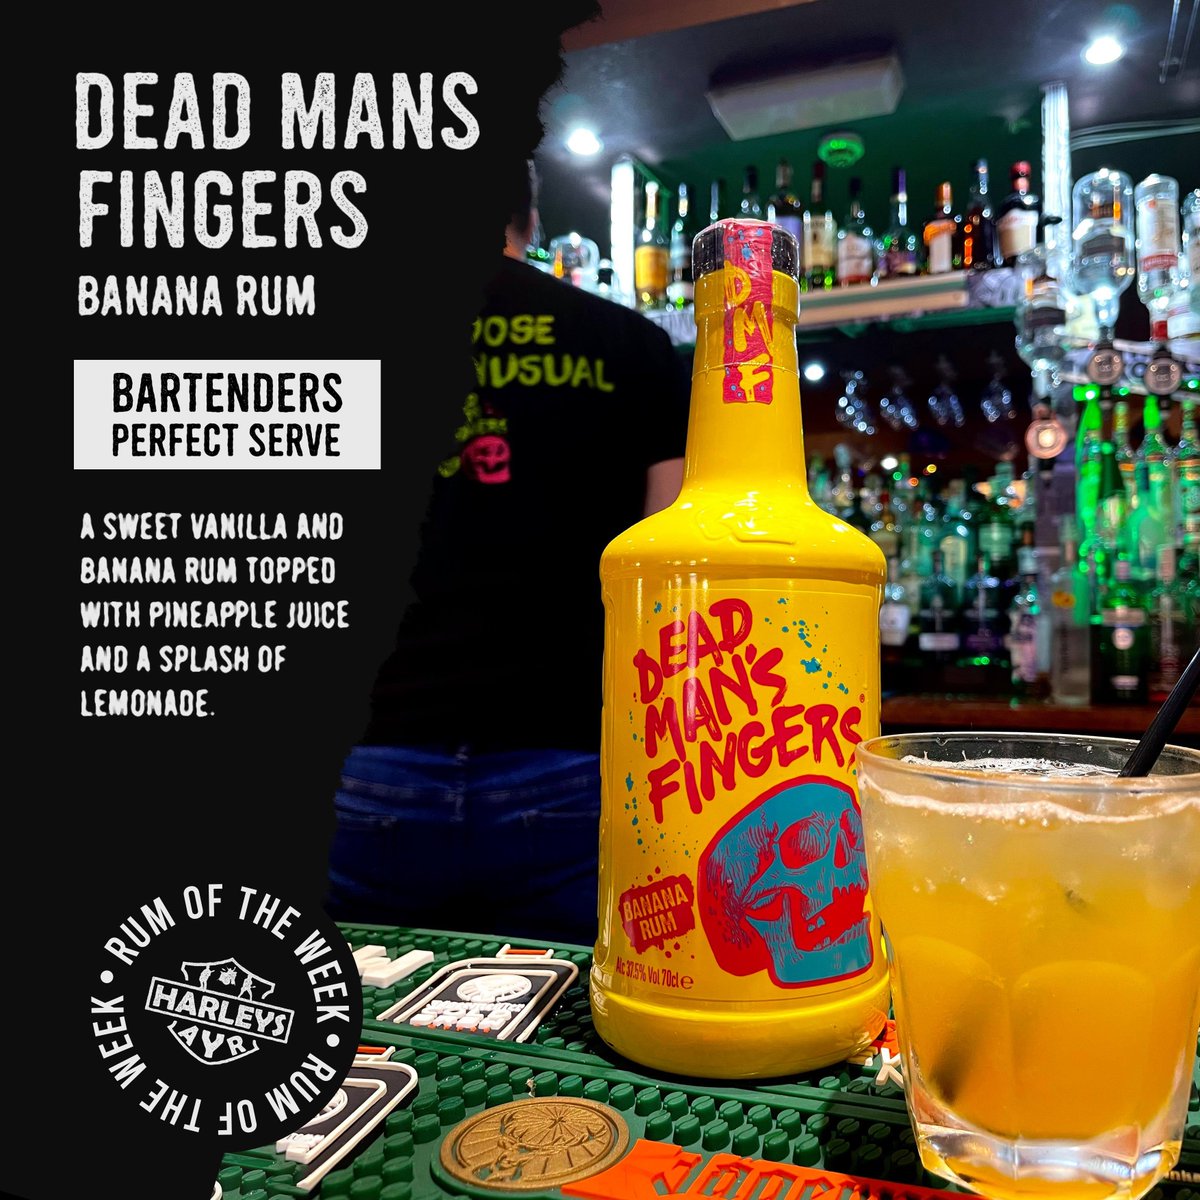 𝐓𝐇𝐈𝐒 𝐖𝐄𝐄𝐊'𝐒 𝐑𝐔𝐌 𝐎𝐓𝐖 - DMF Banana Rum 🍌🥃

Try something different this week at Harleys with one of our new Dead Man's Fingers Banana infused rum! 🌴

Order straight from our app today! 📱

#rumoftheweek